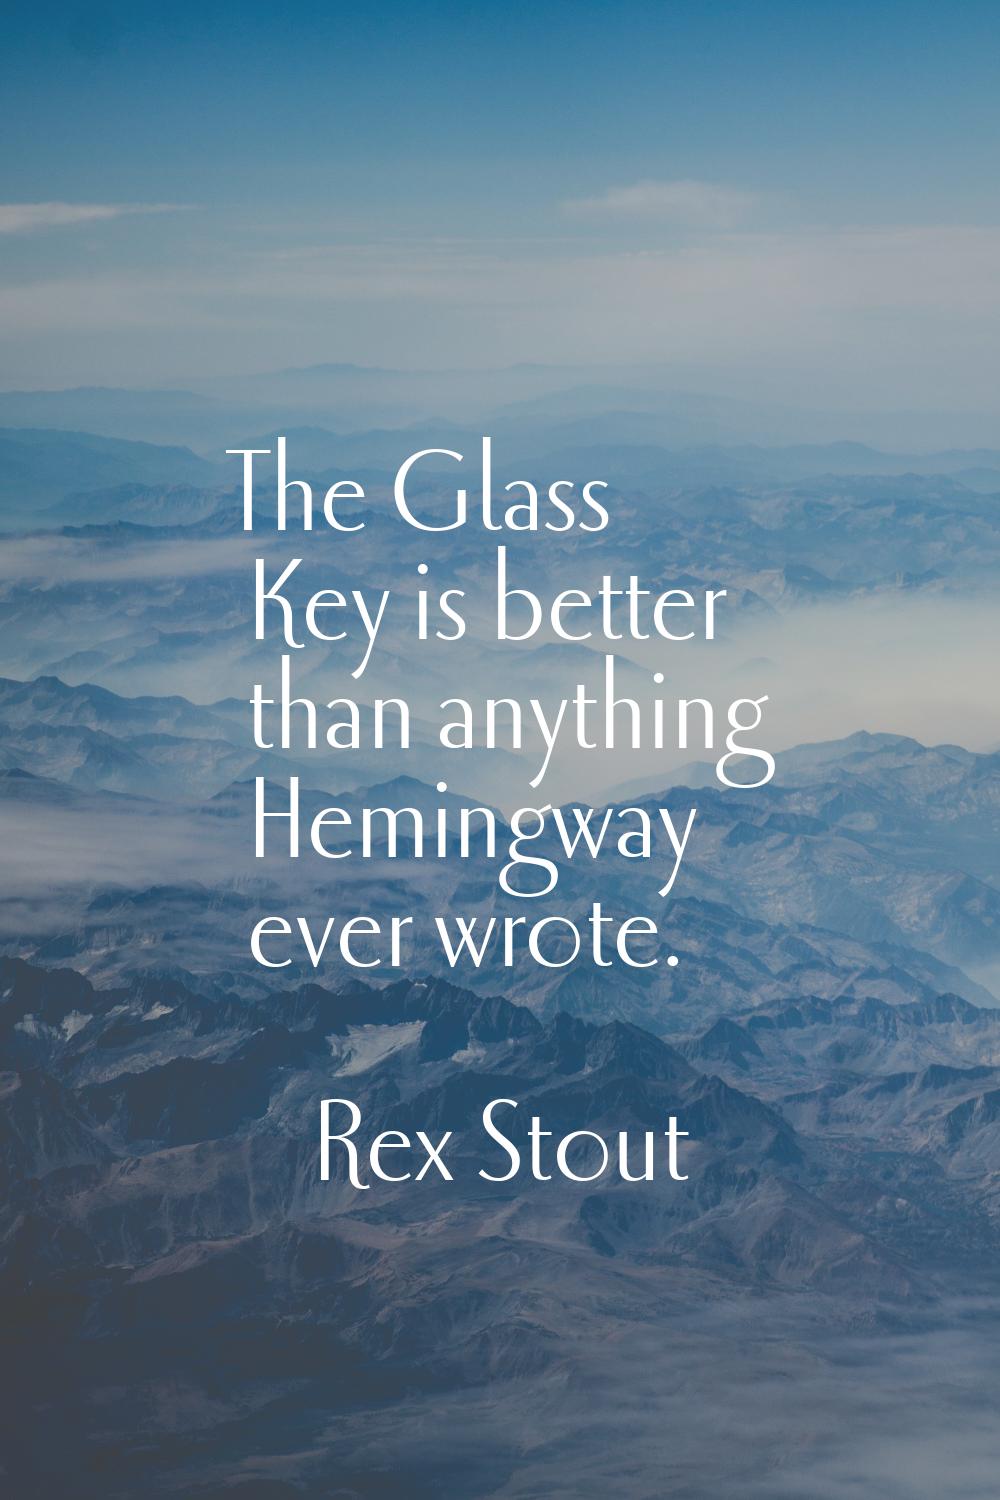 The Glass Key is better than anything Hemingway ever wrote.